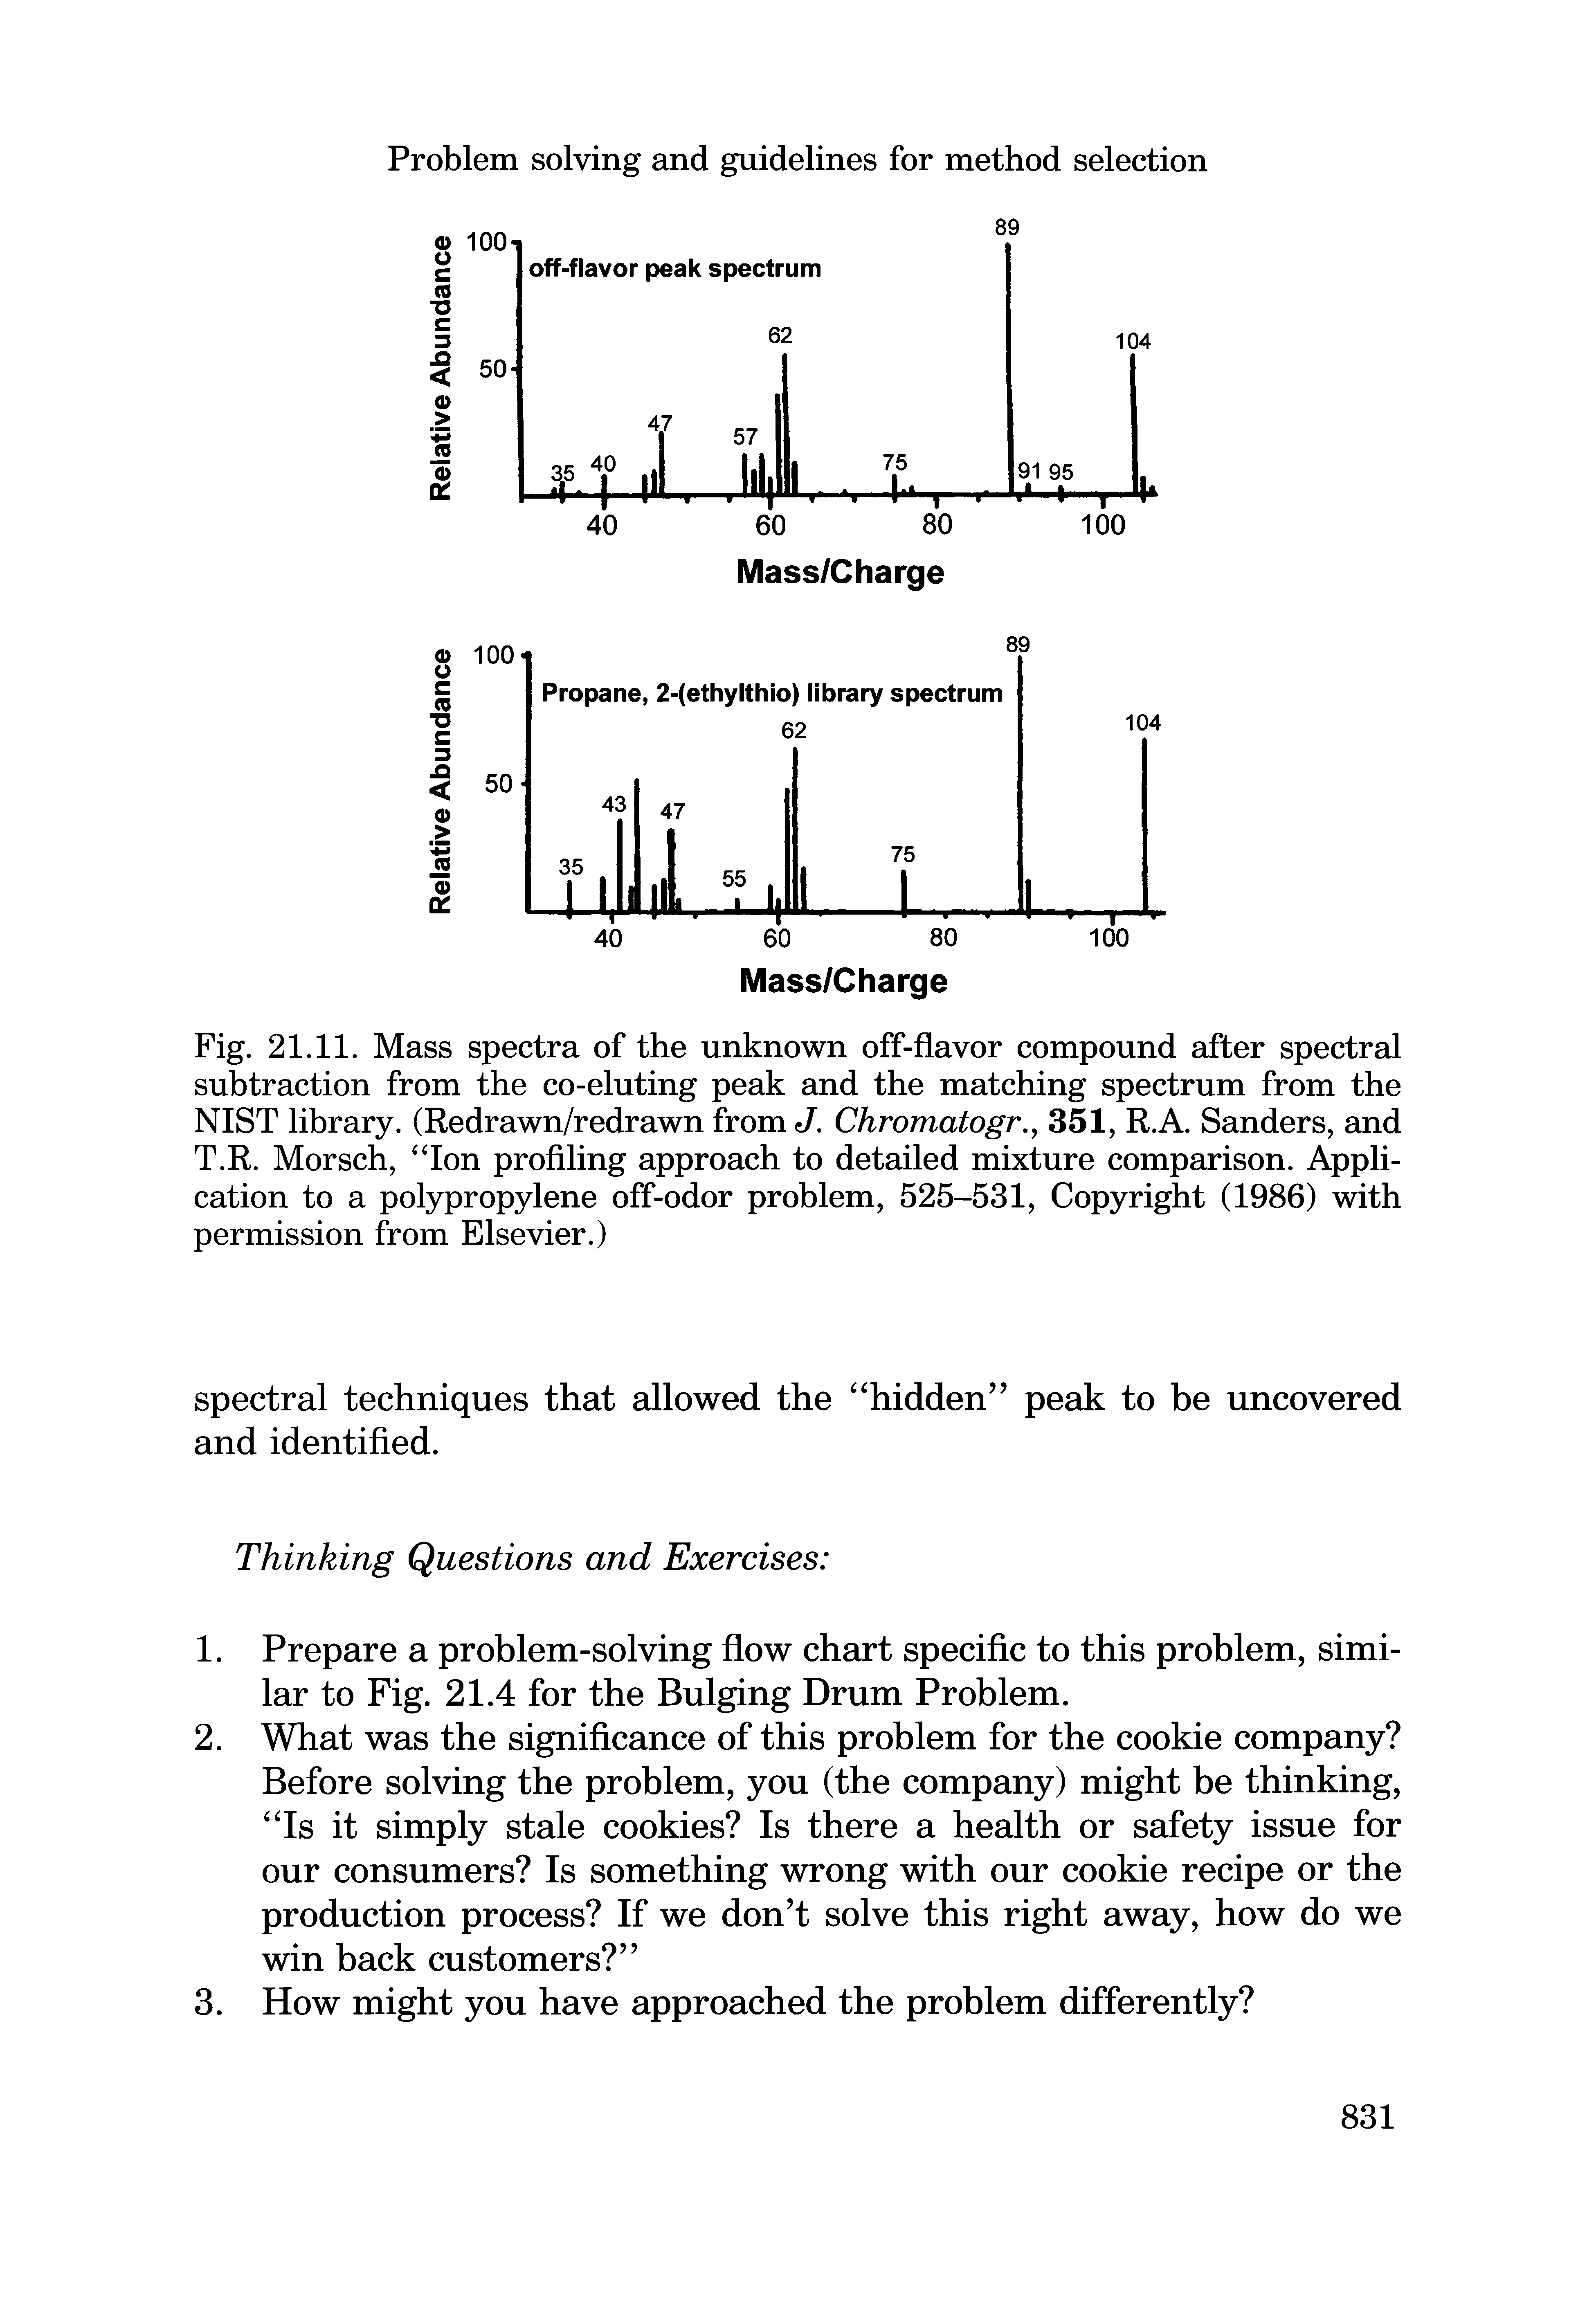 Fig. 21.11. Mass spectra of the unknown off-flavor compound after spectral subtraction from the co-eluting peak and the matching spectrum from the NIST library. (Redrawn/redrawn from J. Chromatogr., 351, R.A. Sanders, and T.R. Morsch, Ion profiling approach to detailed mixture comparison. Application to a polypropylene off-odor problem, 525-531, Copyright (1986) with permission from Elsevier.)...